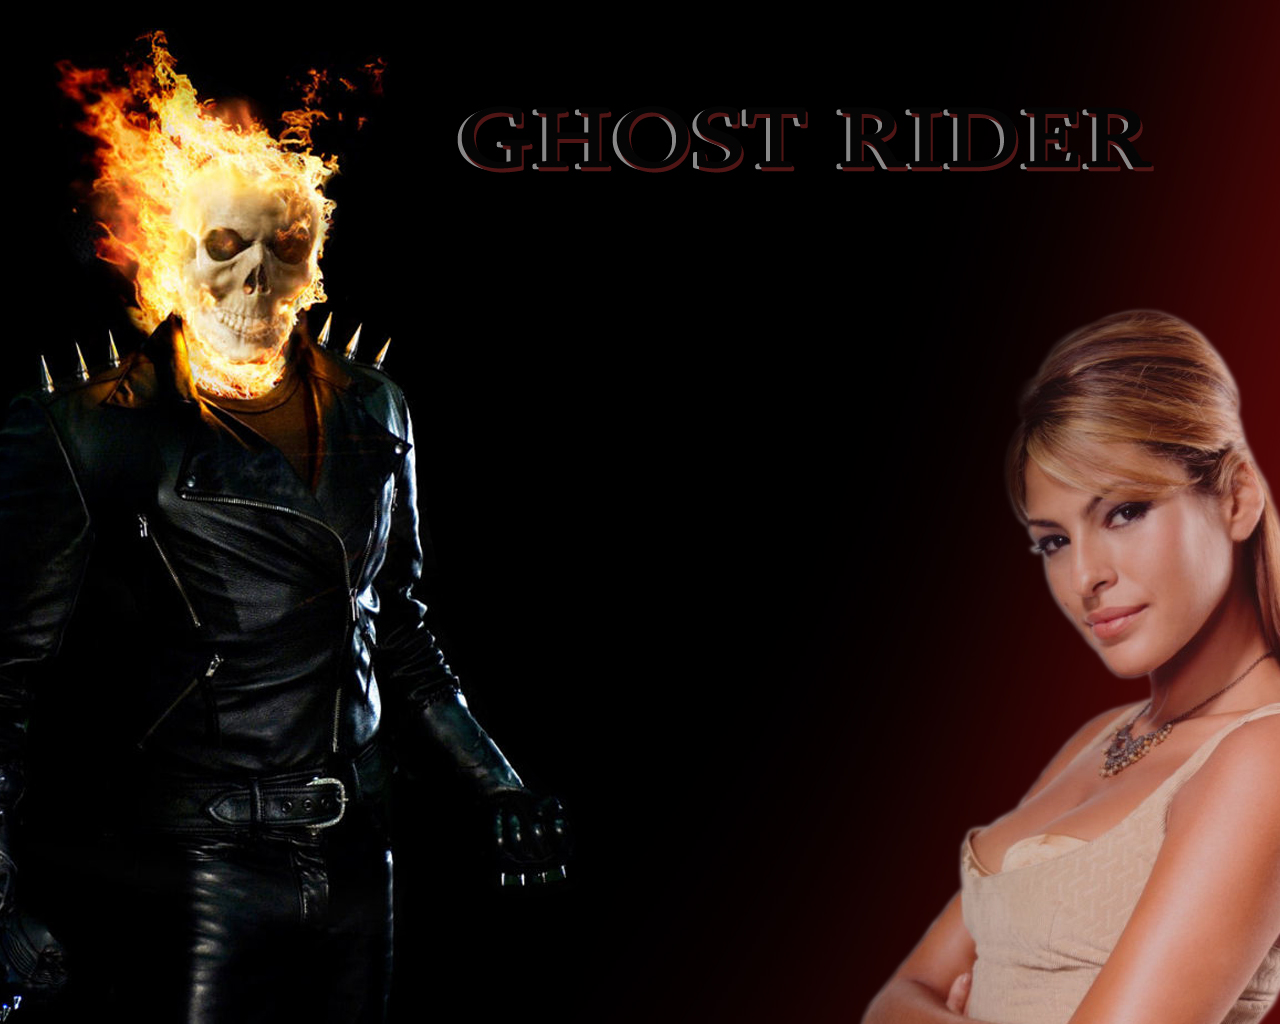 ghost rider 2 cast and crew